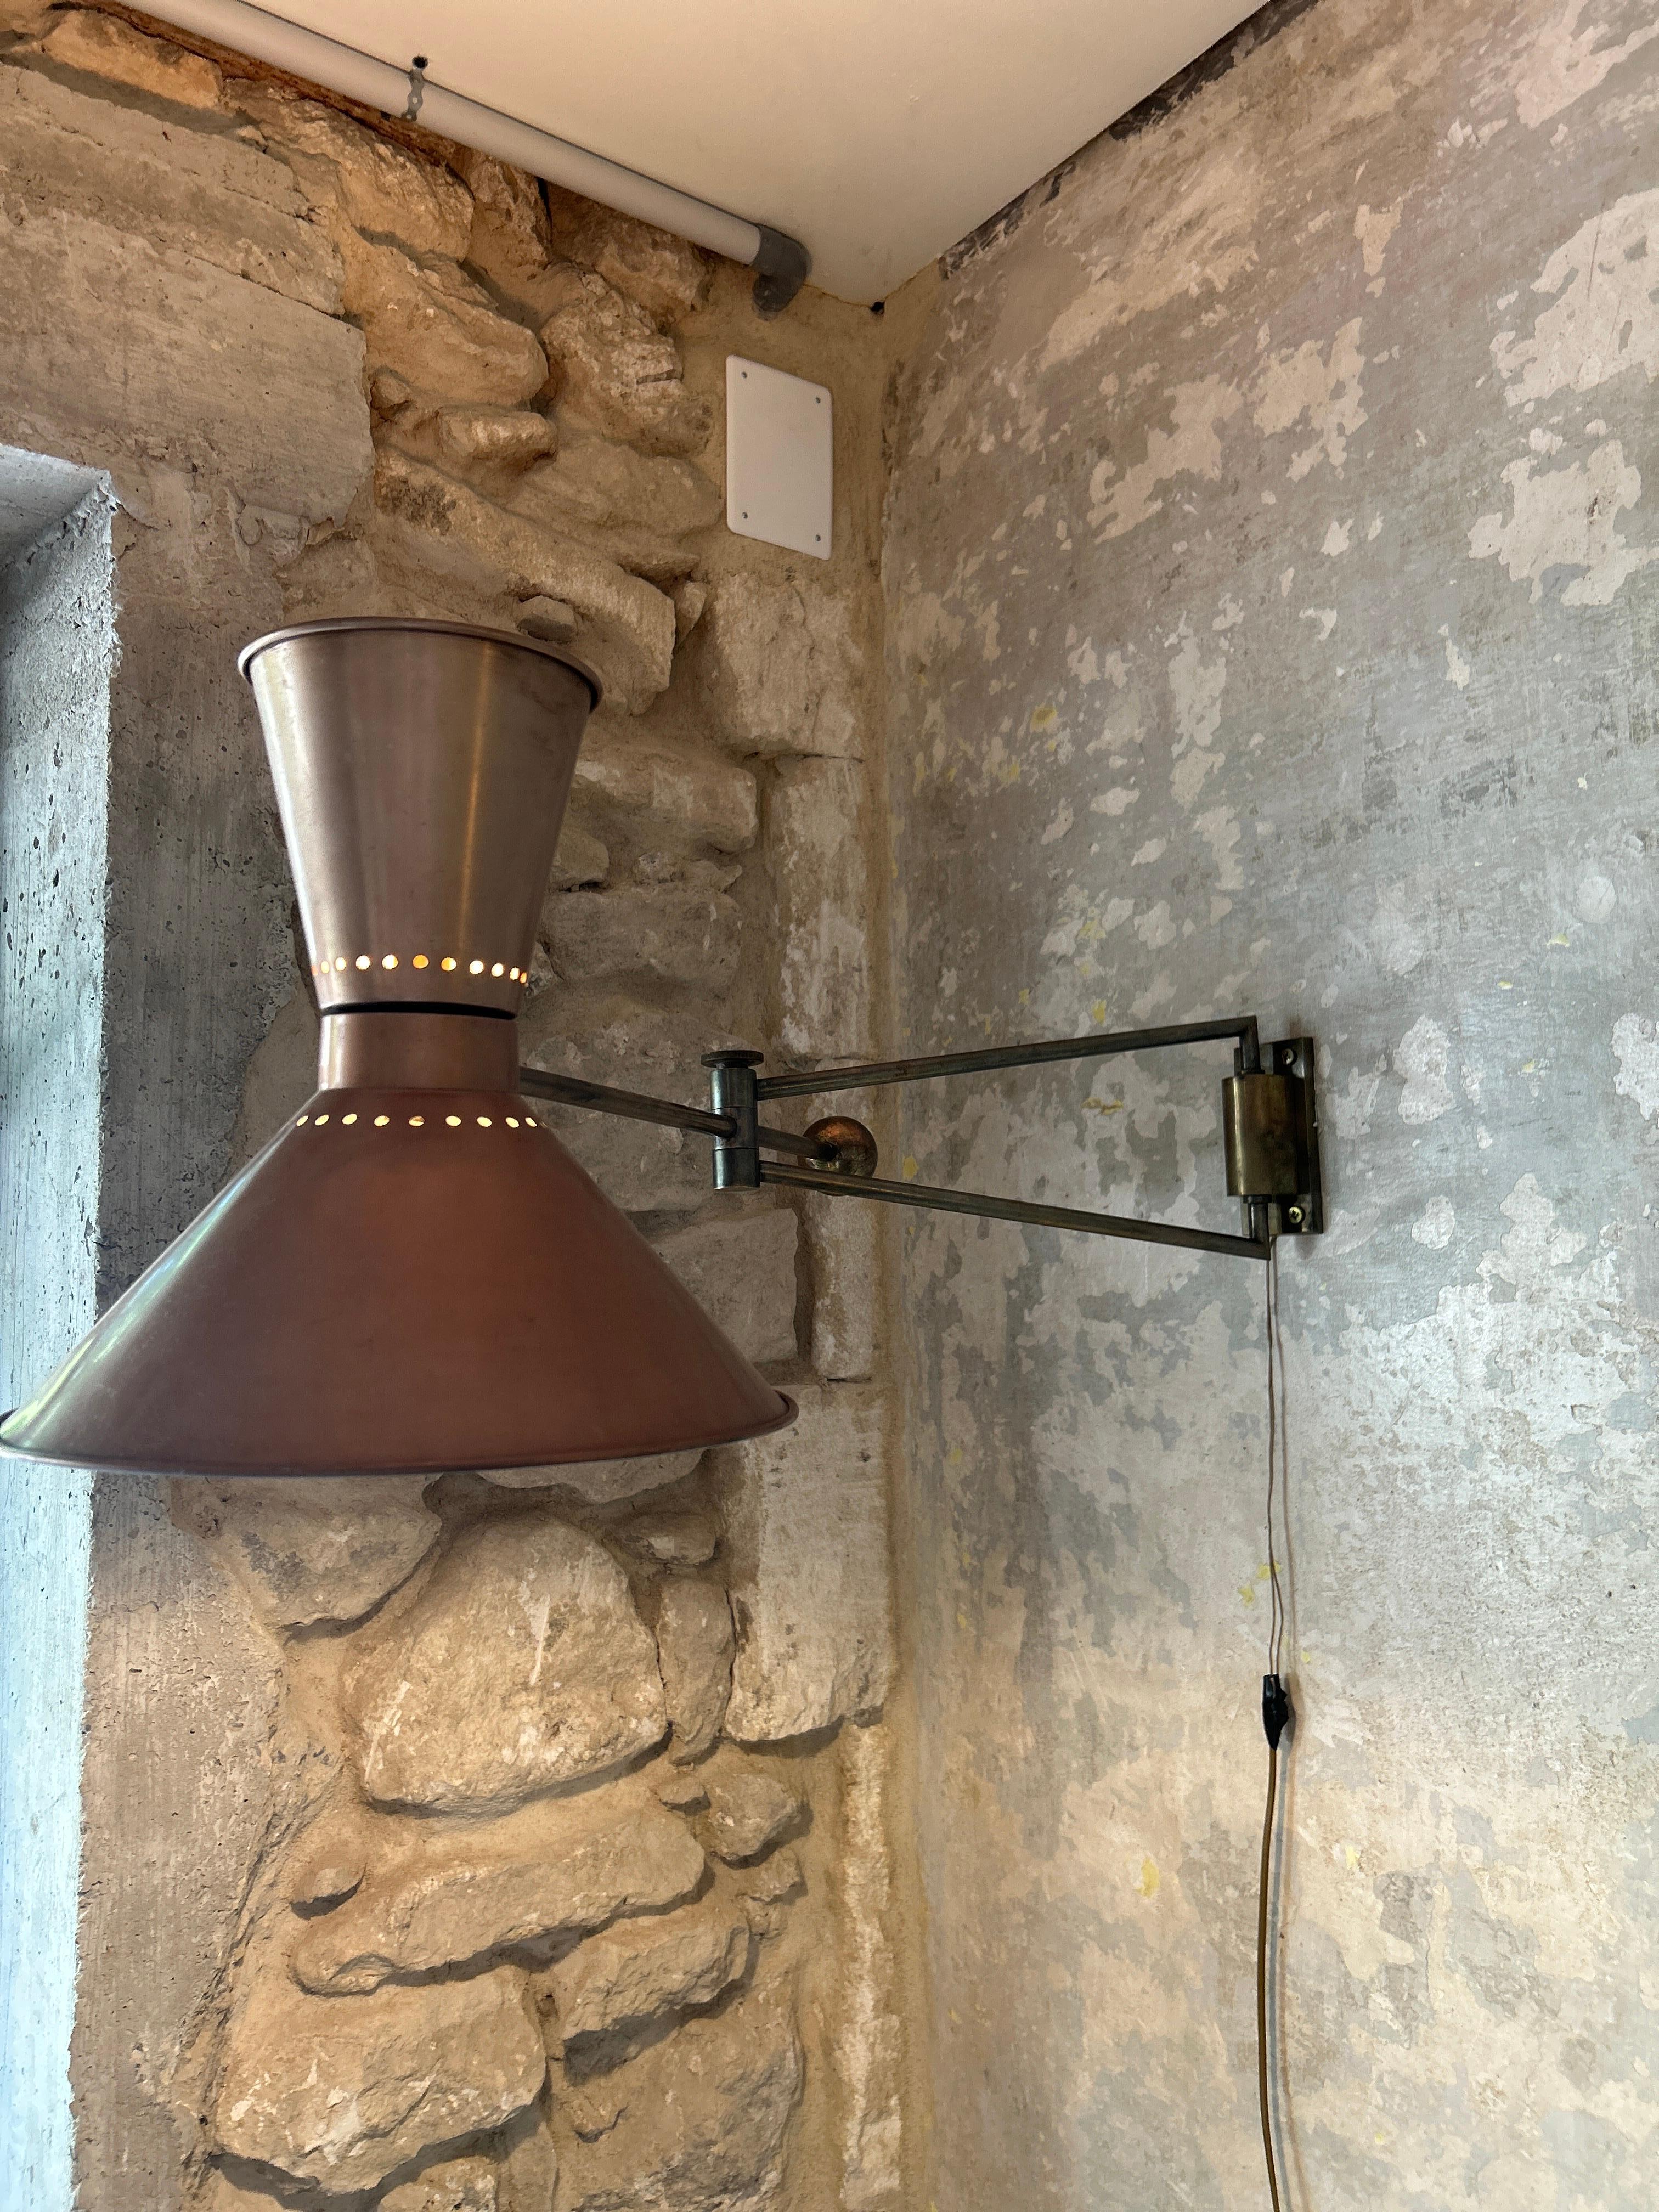 MARCEL ASSELBUR (1910-1964) 
Articulated wall lamp with double orientation, tubular shaft with gunmetal patina, biconical perforated deflector with copper patina, counterweight, adjustable ferrule and brass mounting plate.
In working order 
Good